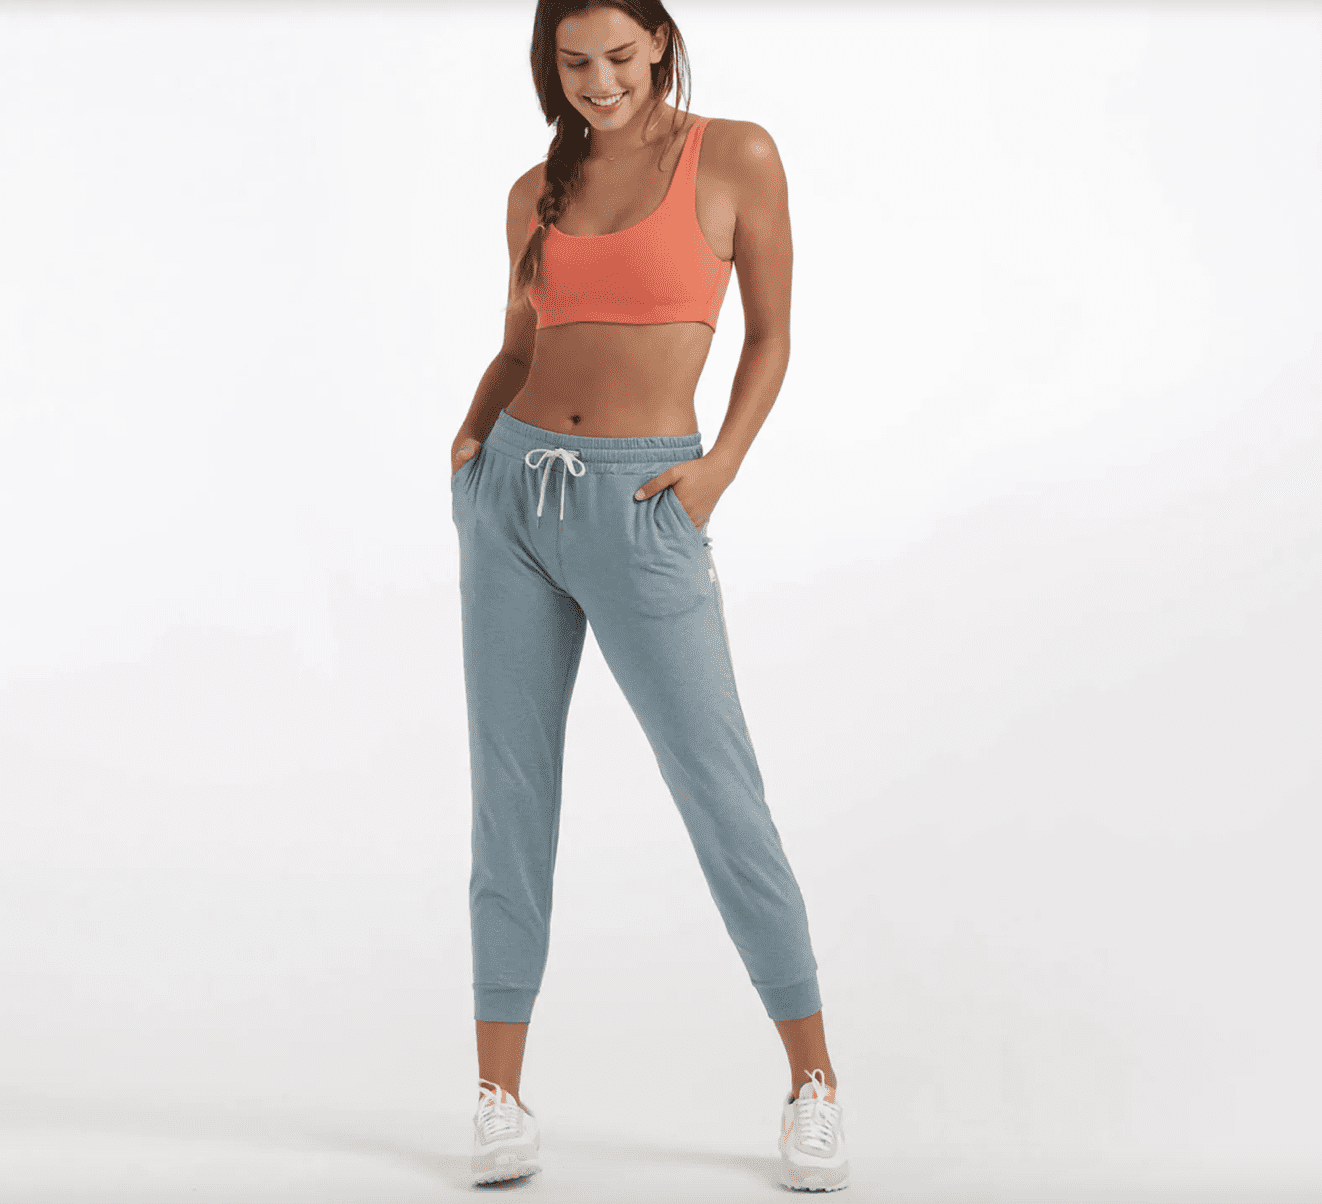 The best joggers for women